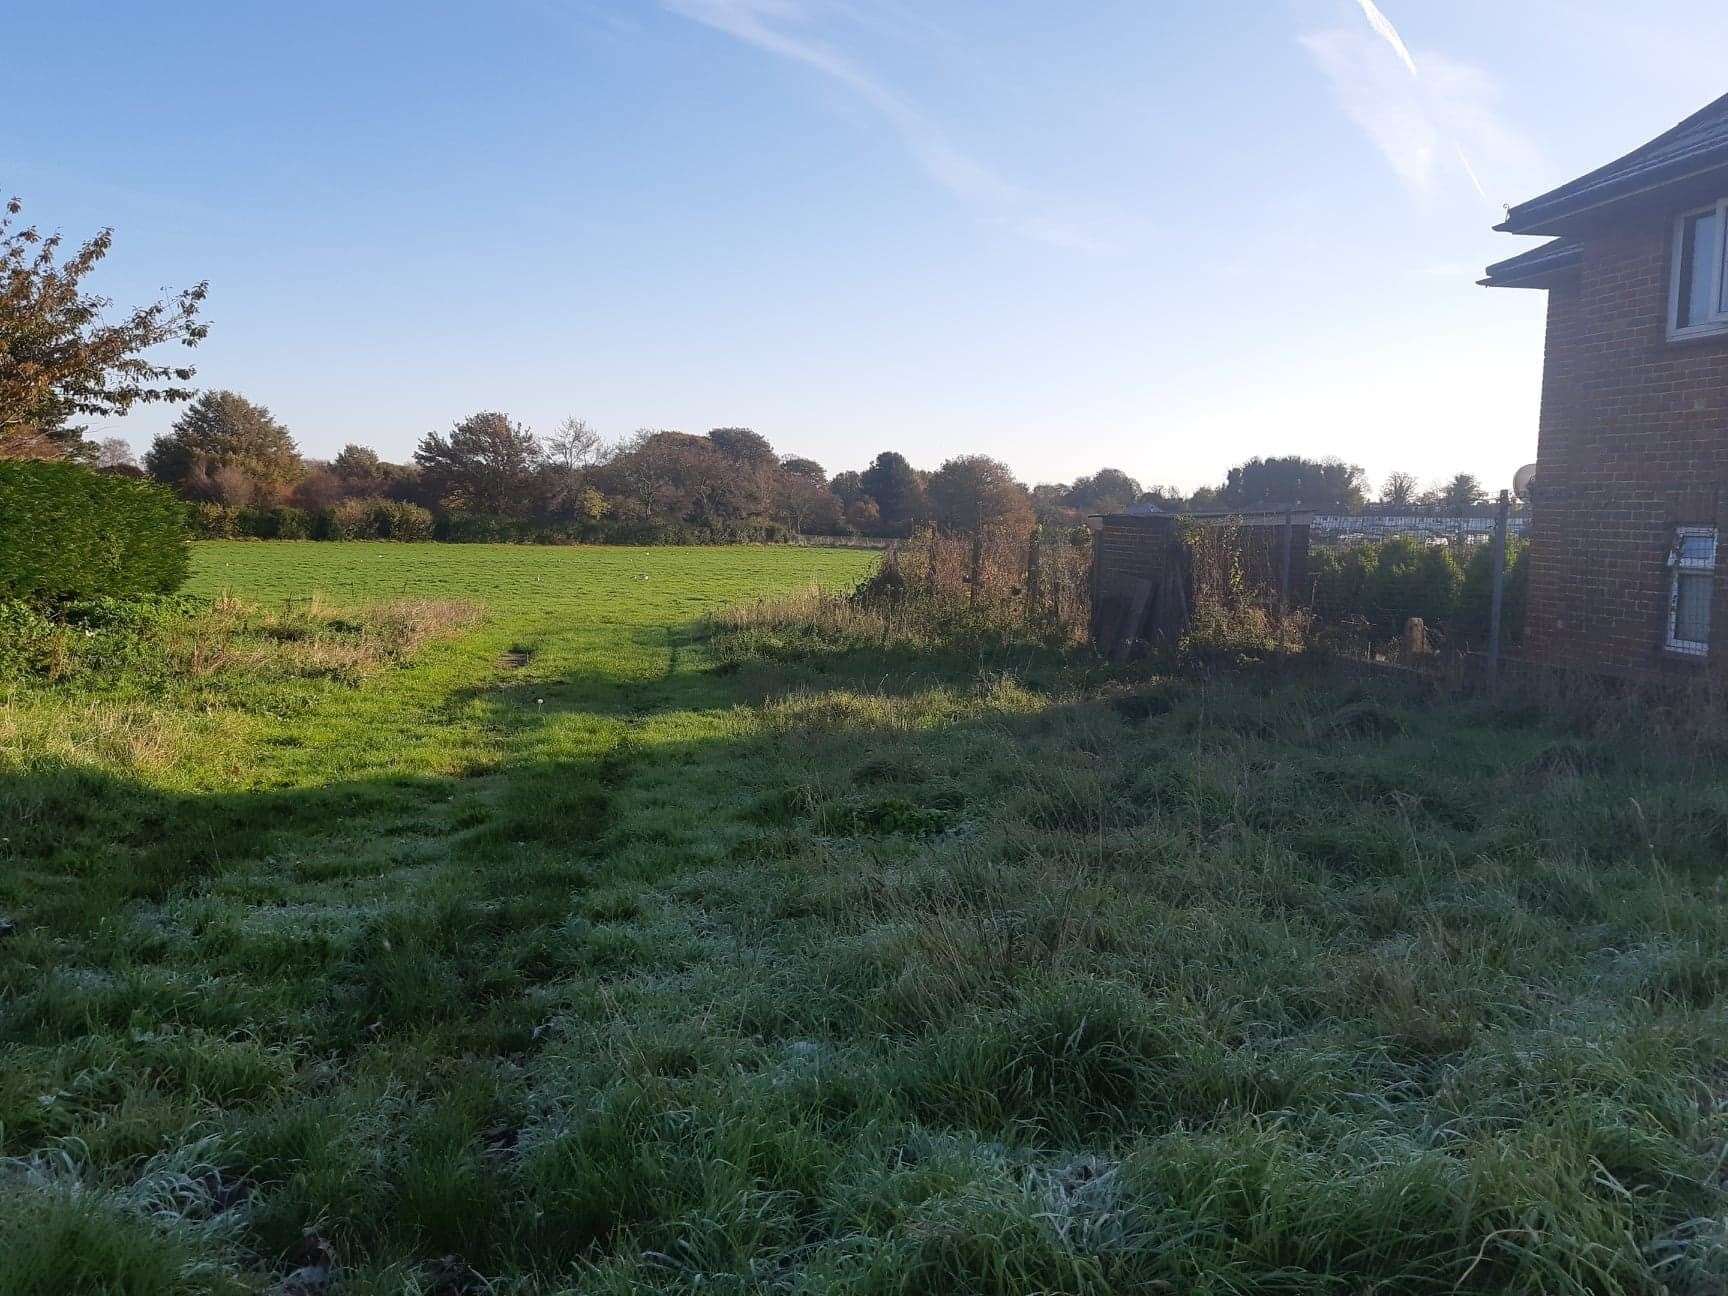 Plans for 88 homes have been passed for the site off Freemens Way in Deal